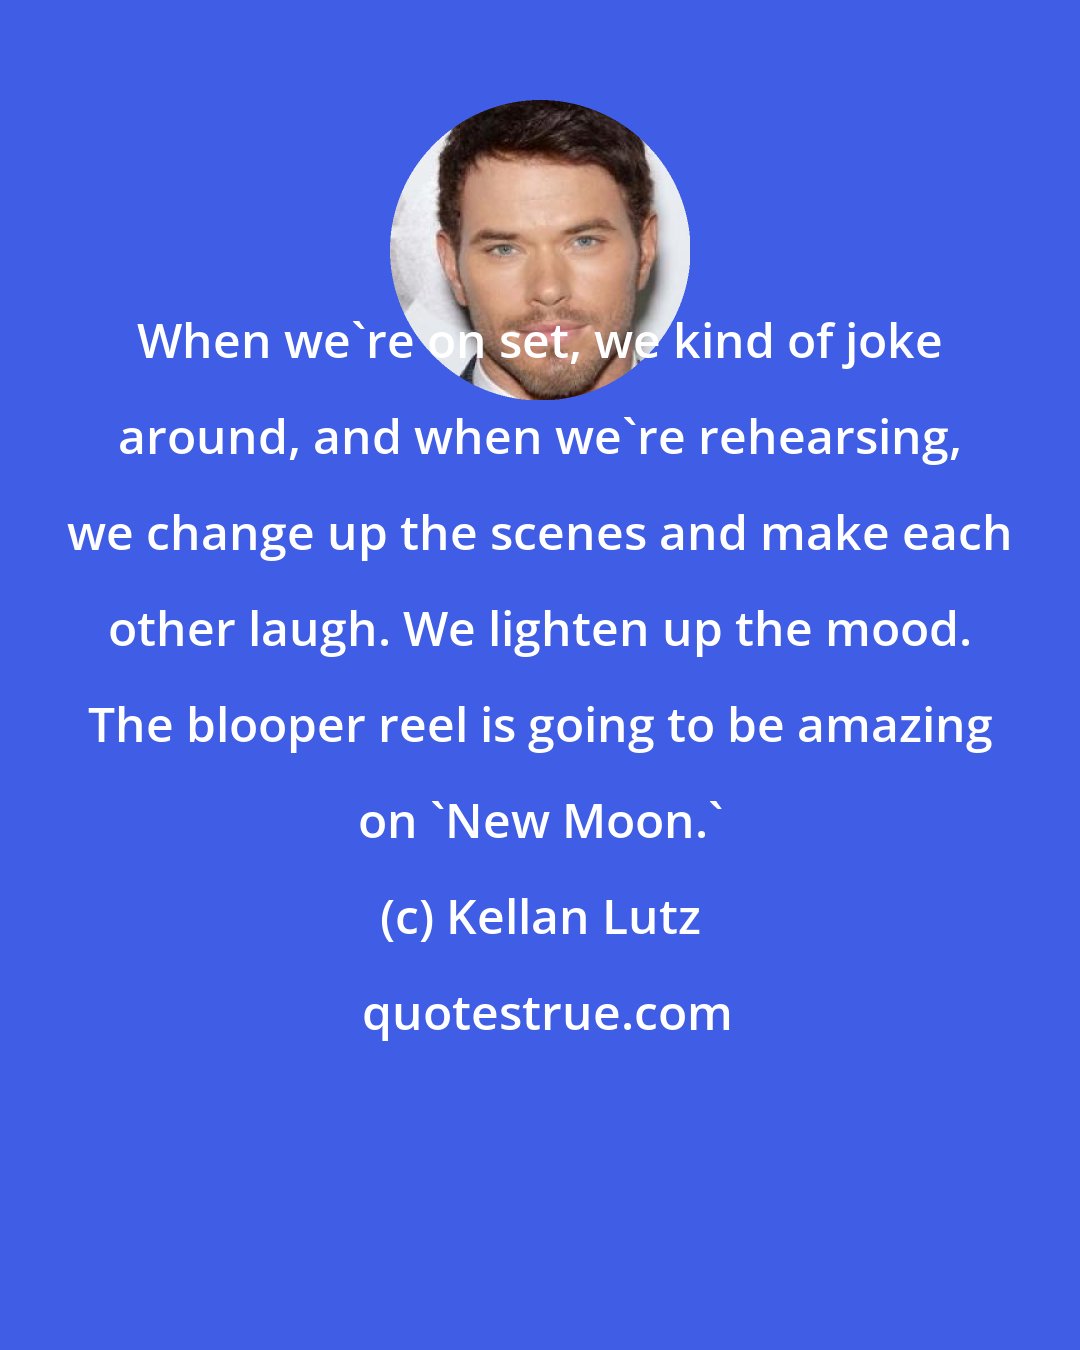 Kellan Lutz: When we're on set, we kind of joke around, and when we're rehearsing, we change up the scenes and make each other laugh. We lighten up the mood. The blooper reel is going to be amazing on 'New Moon.'